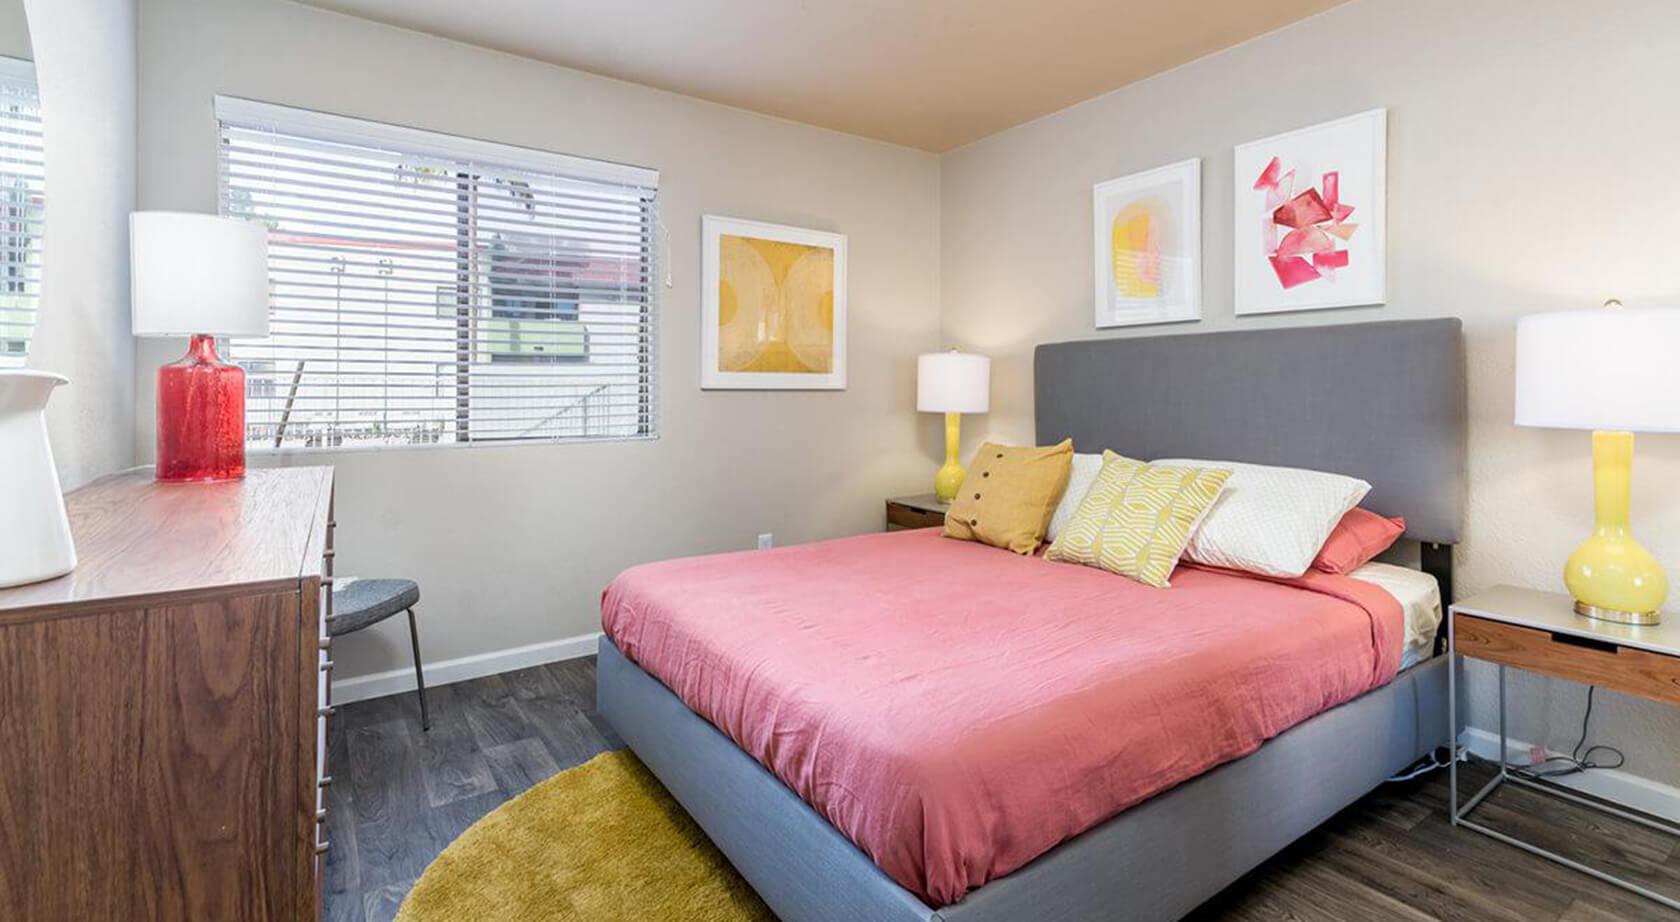 Fully furnished bedroom at Spring in Phoenix, Arizona